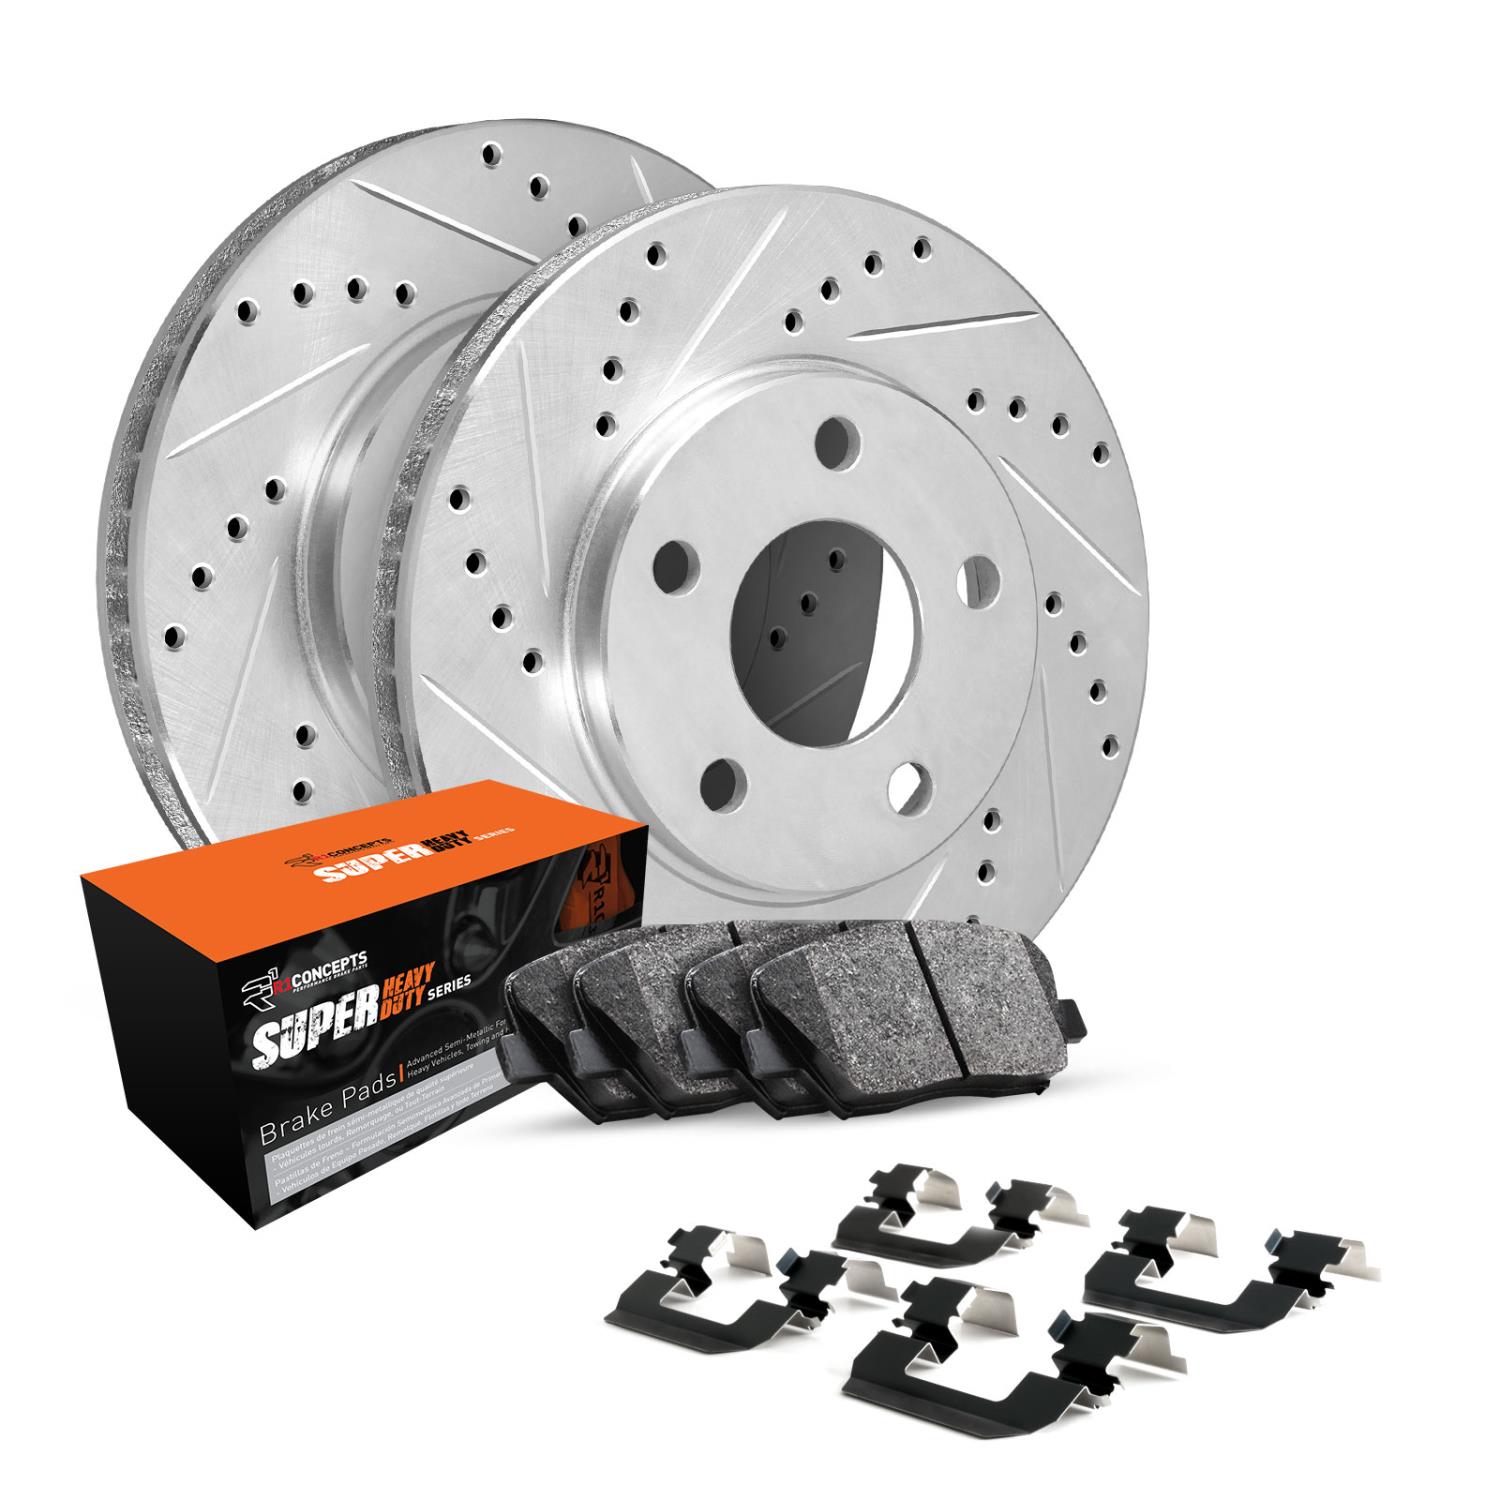 E-Line Drilled & Slotted Silver Brake Rotor Set w/Super-Duty Pads & Hardware, Fits Select Fits Multiple Makes/Models